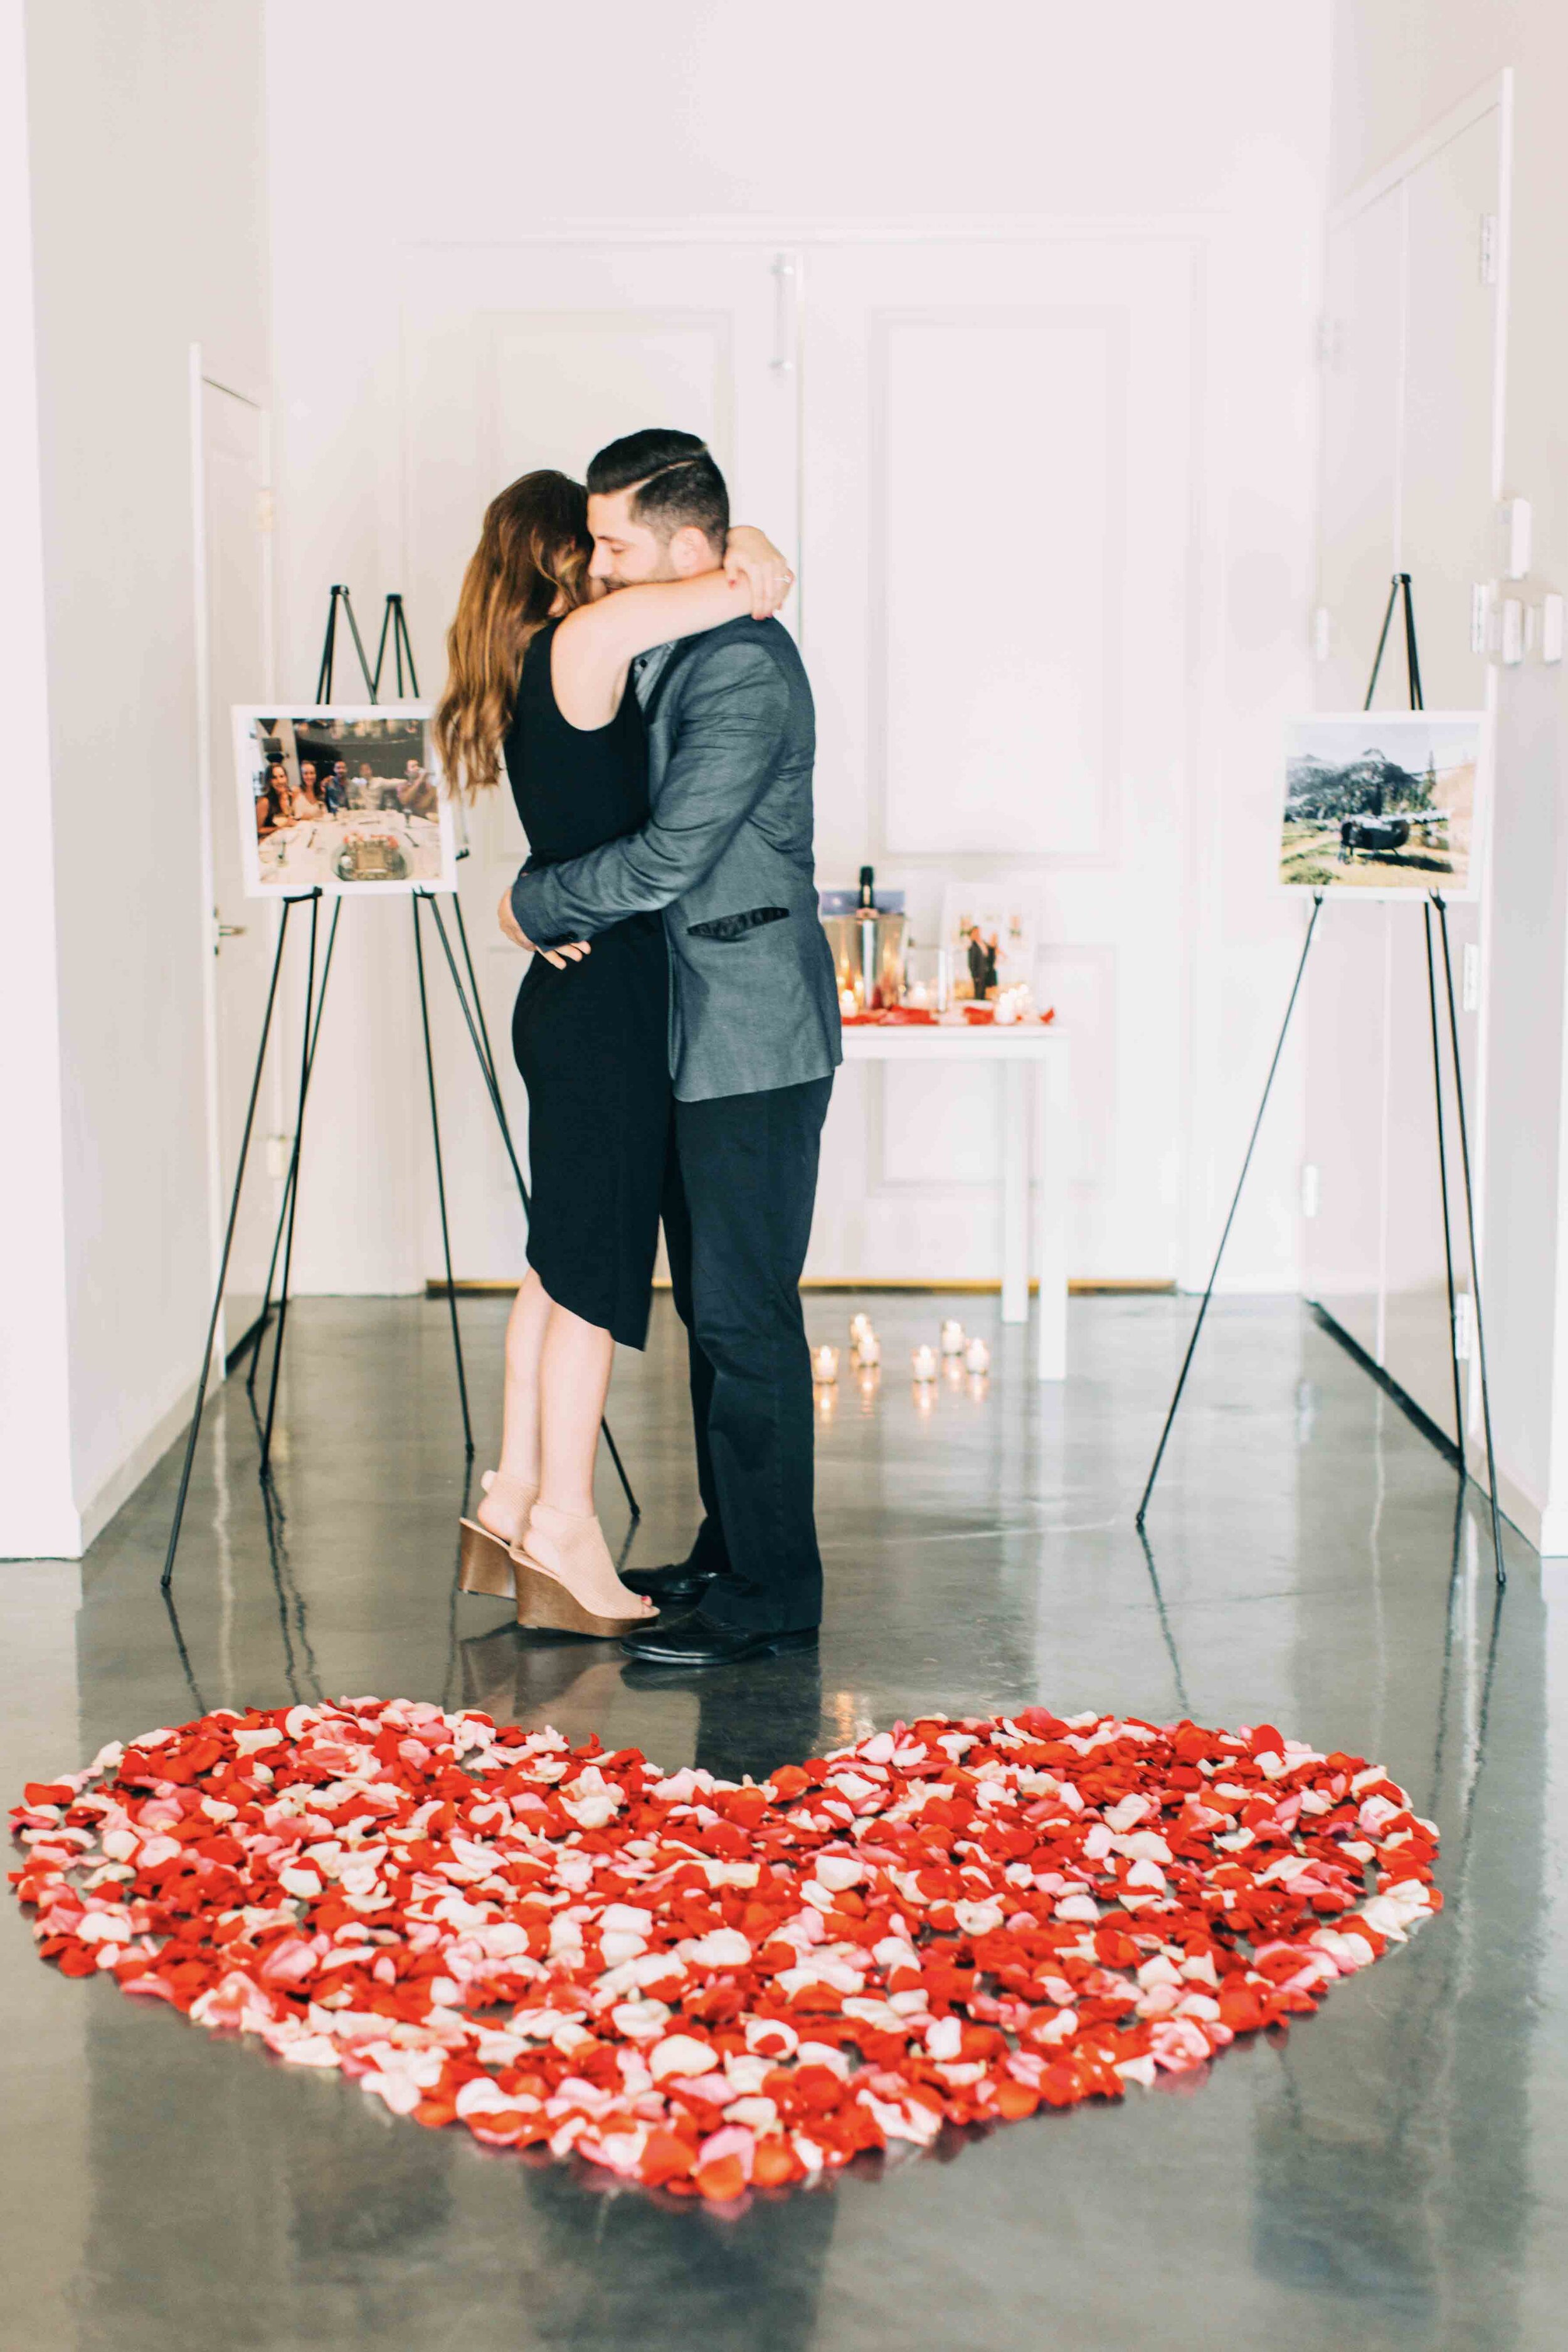 Rose pedals and happy couple share atlanta proposal